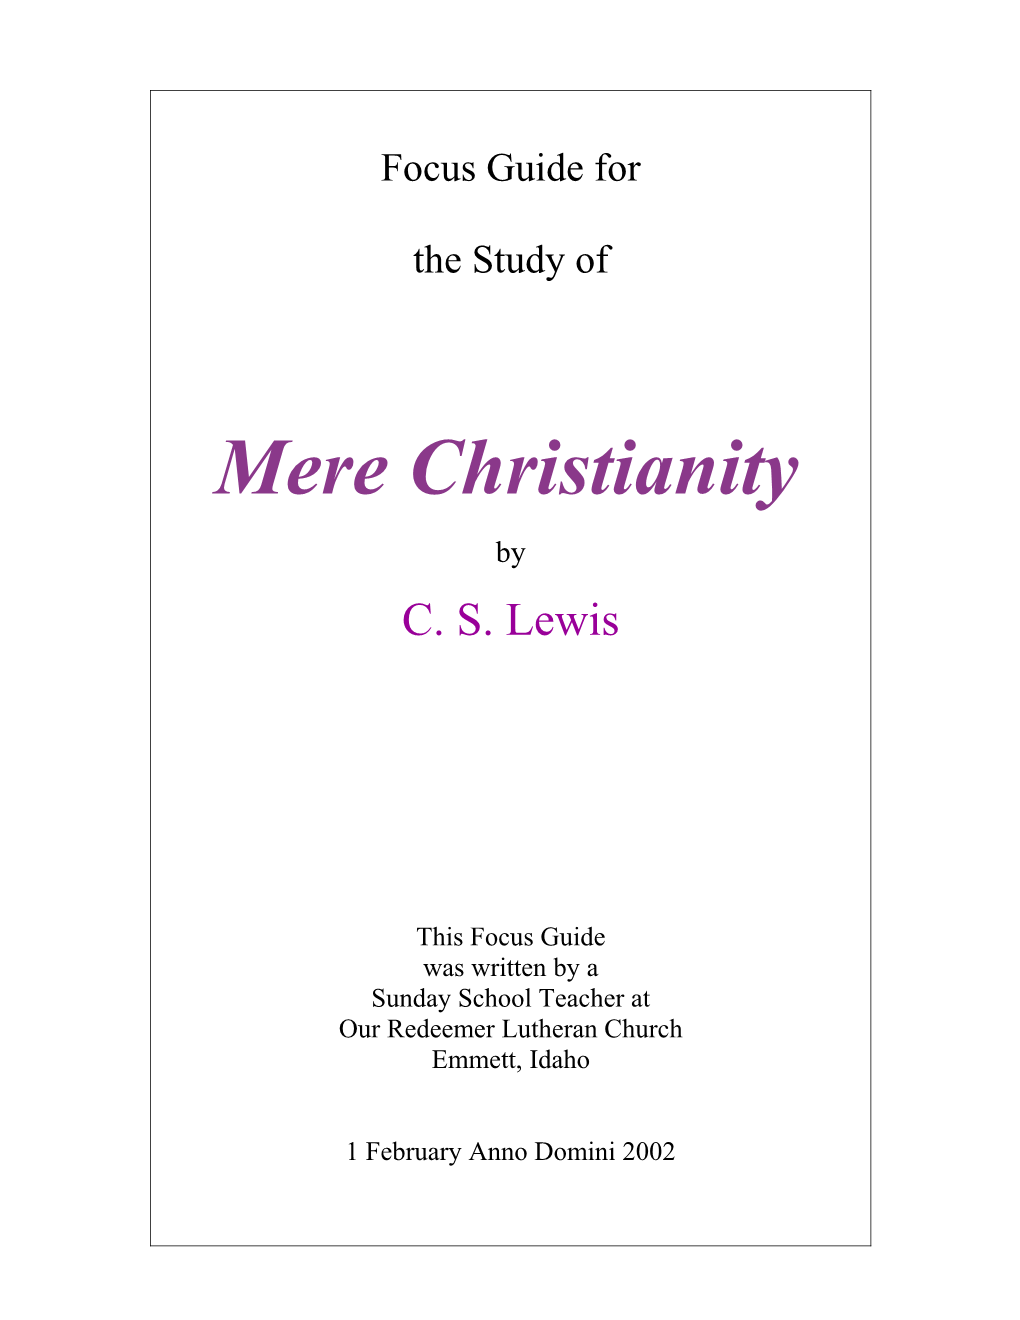 Mere Christianity by C. S. Lewis, the British Academic, Christian Writer, and Literary